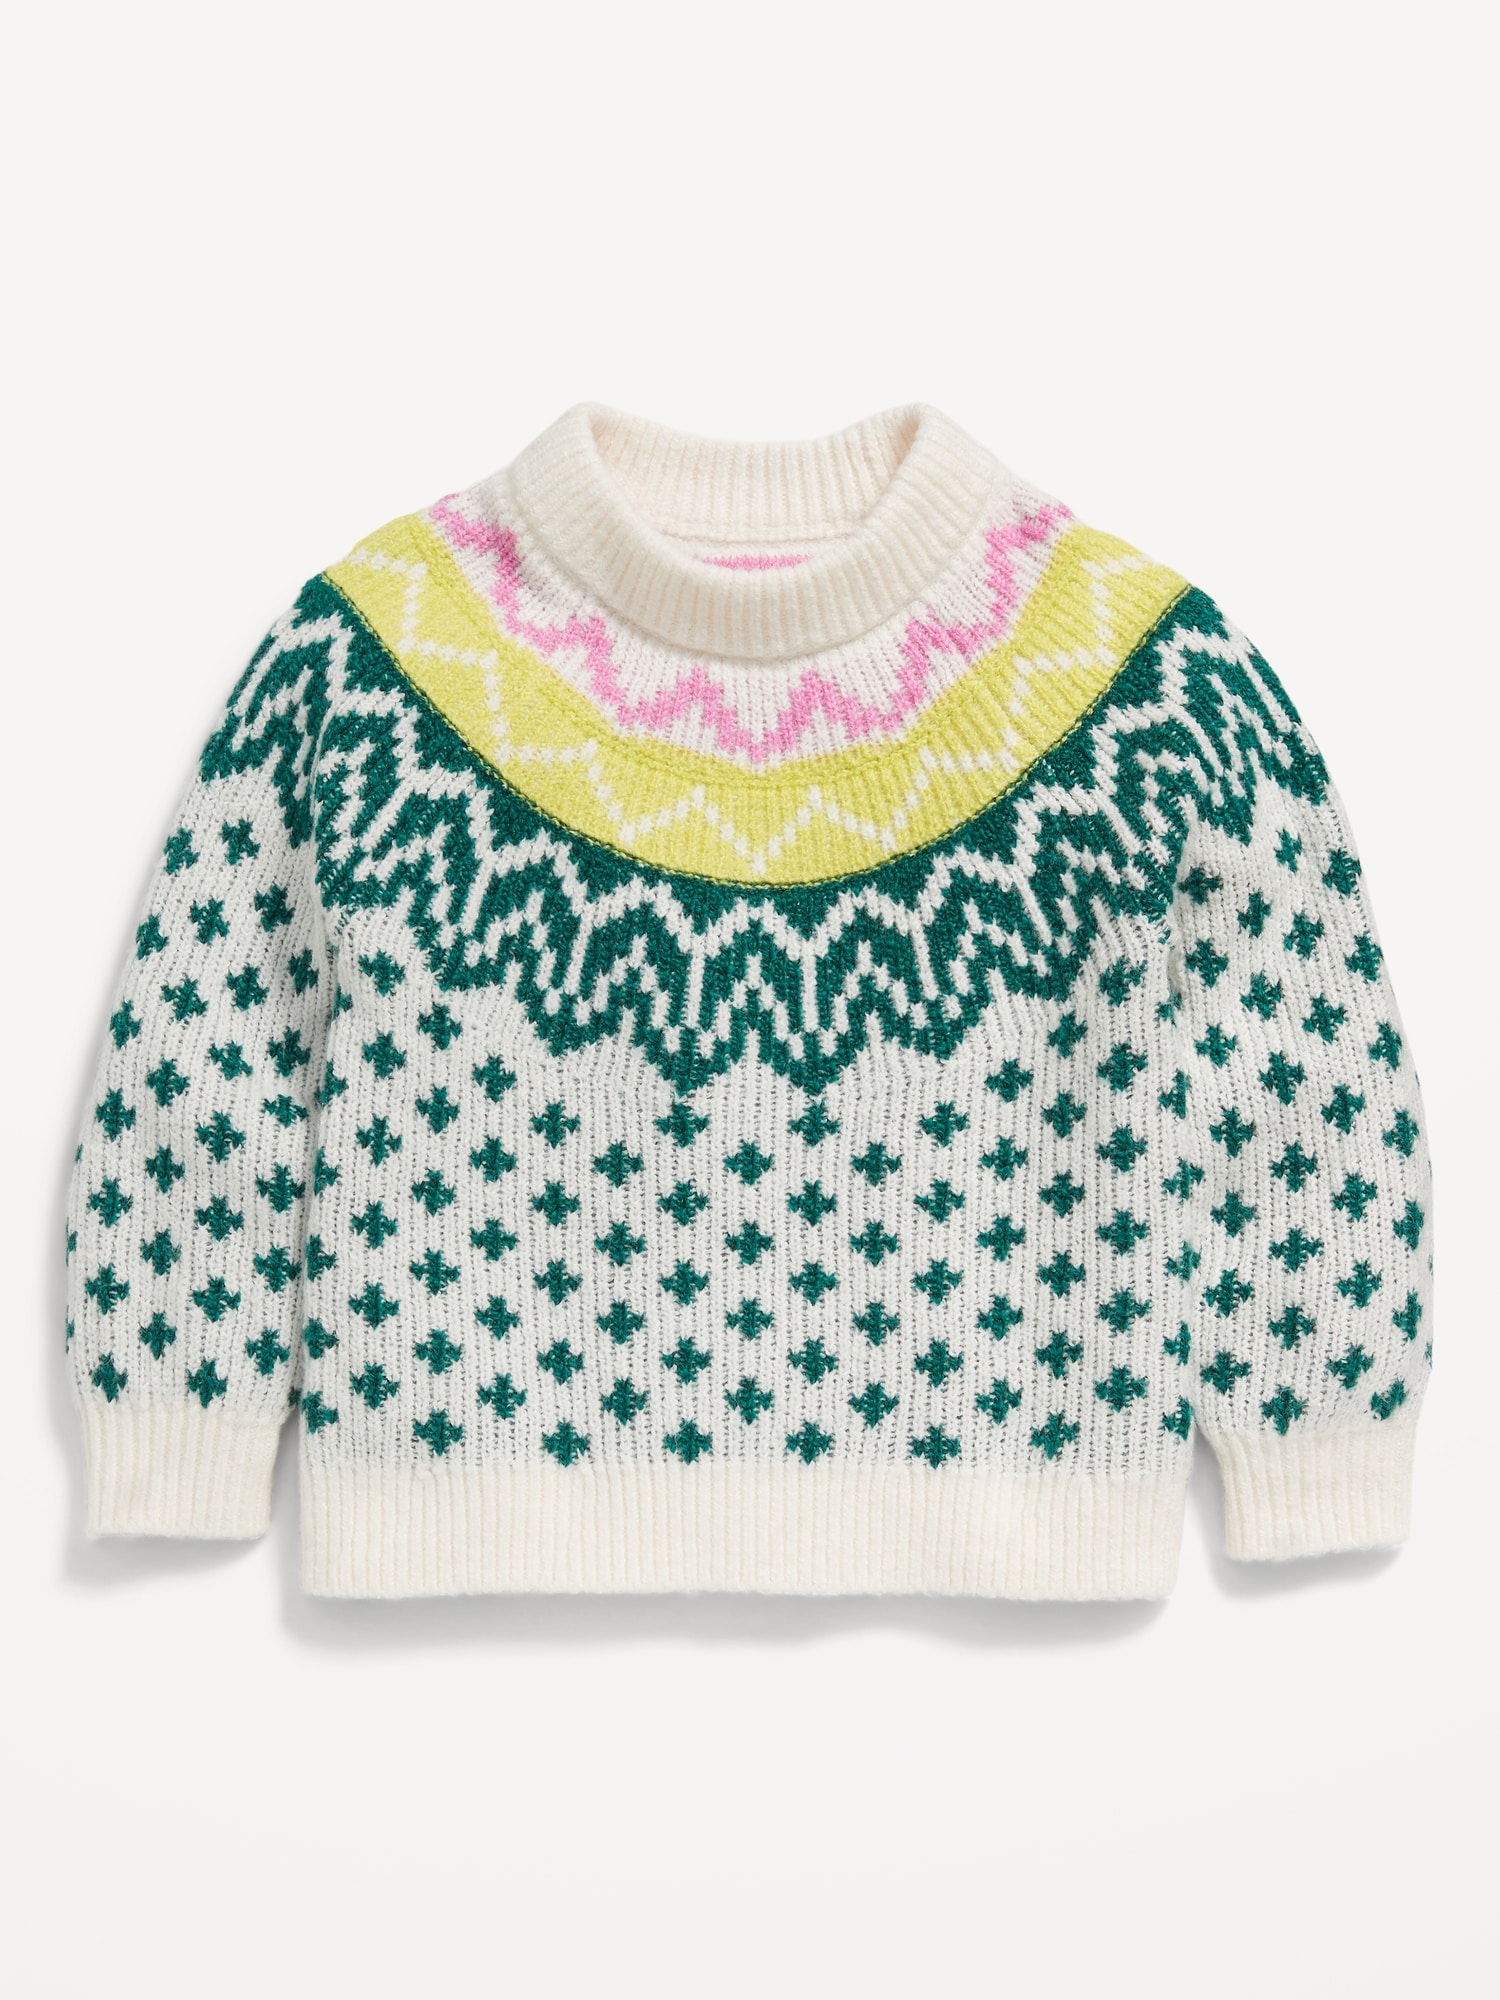 Cozy Fair Isle Pullover Sweater for Toddler Girls | Old Navy